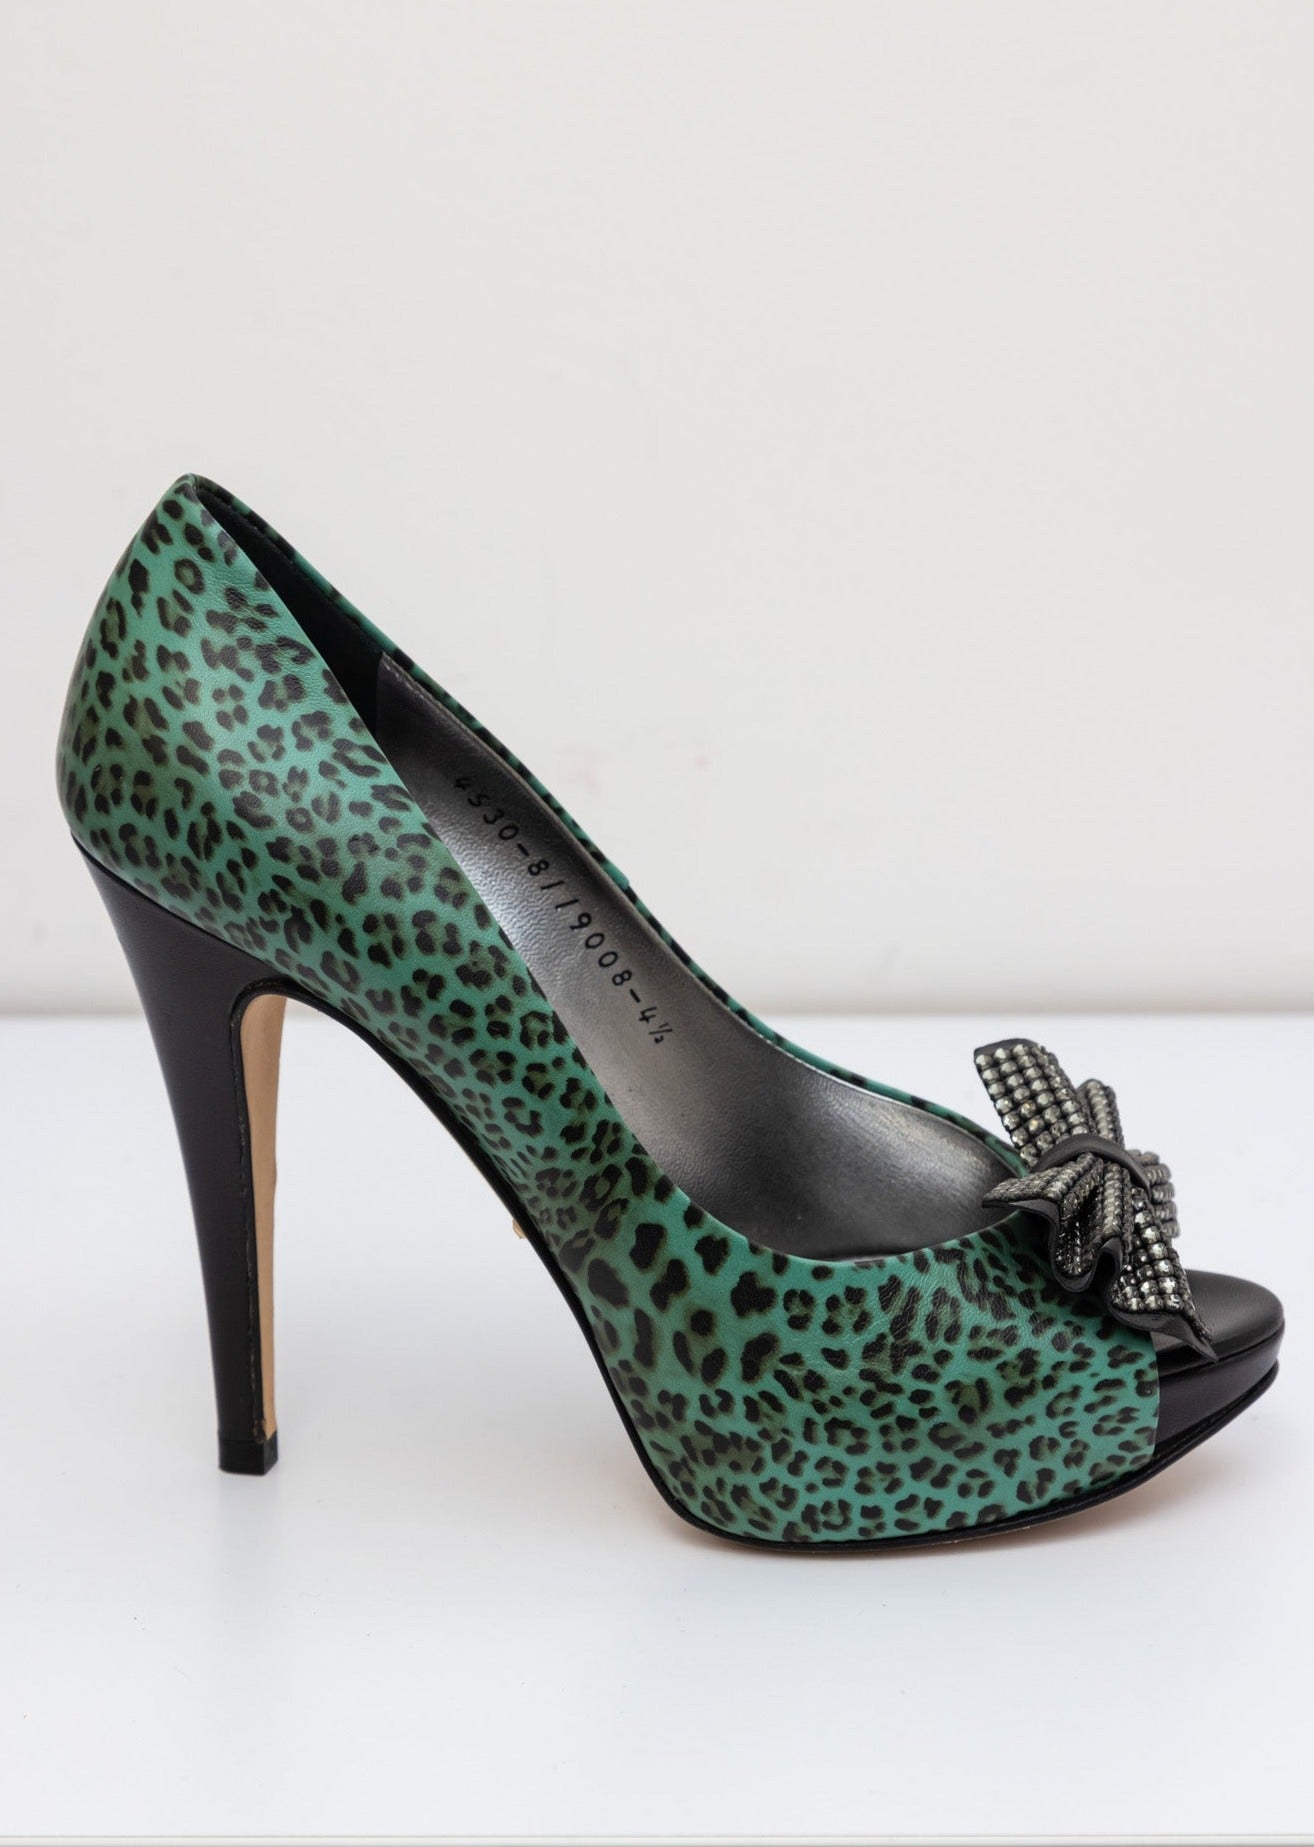 GINA Leather Green Heels Shoes with Leopard Print | Size UK 4.5 | Made in England